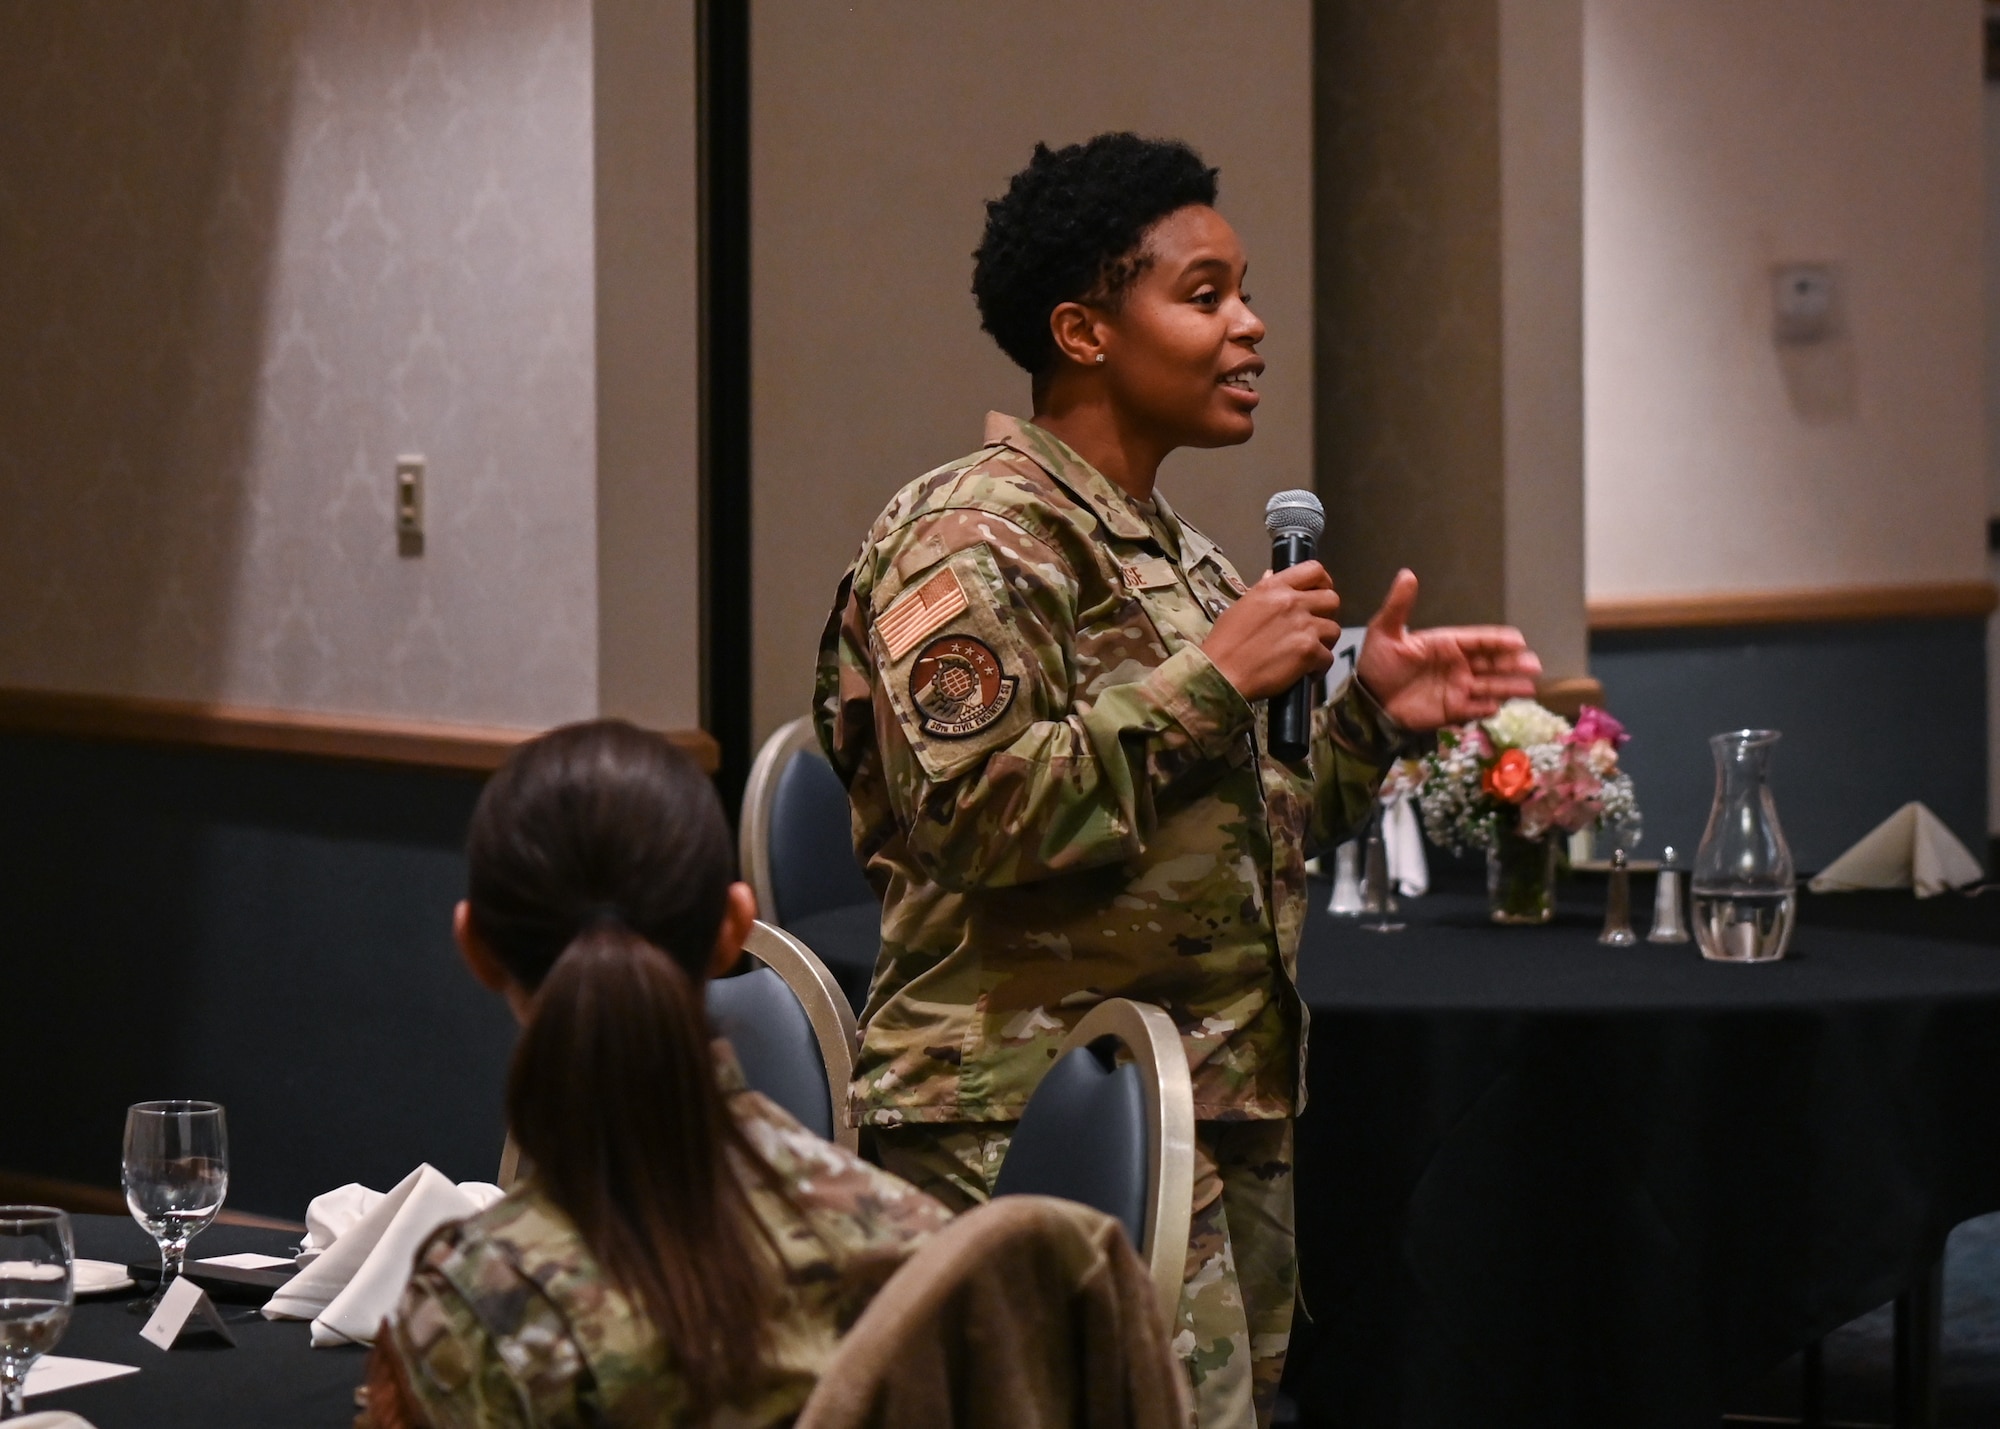 Senior Master Sgt. Asua Rose, 30th Civil Engineering Squadron engineering flight squadron superintendent, speaks to the guests during the Women's History Month luncheon at Vandenberg Space Force Base, Calif., March 21, 2023. Throughout the luncheon several women from team Vandenberg shared their life and career stories with the audience. (U.S. Space Force photo by Senior Airman Tiarra Sibley)